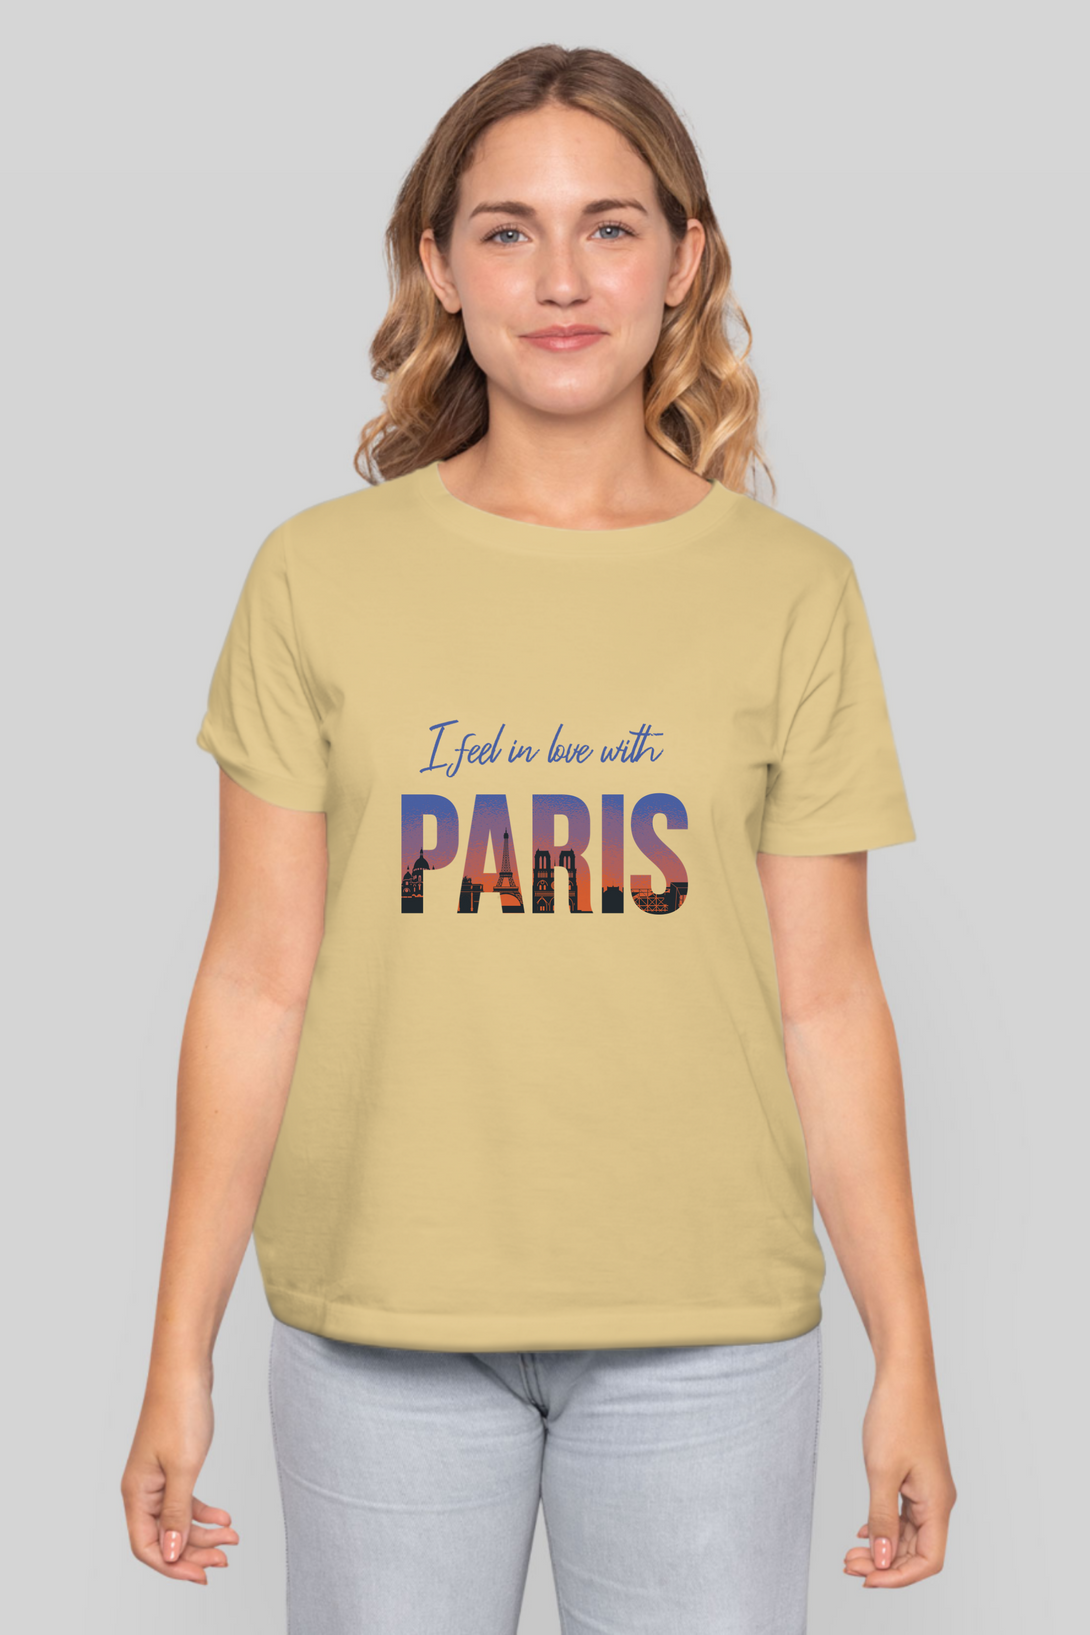 In Love With Paris Printed T-Shirt For Women - WowWaves - 8